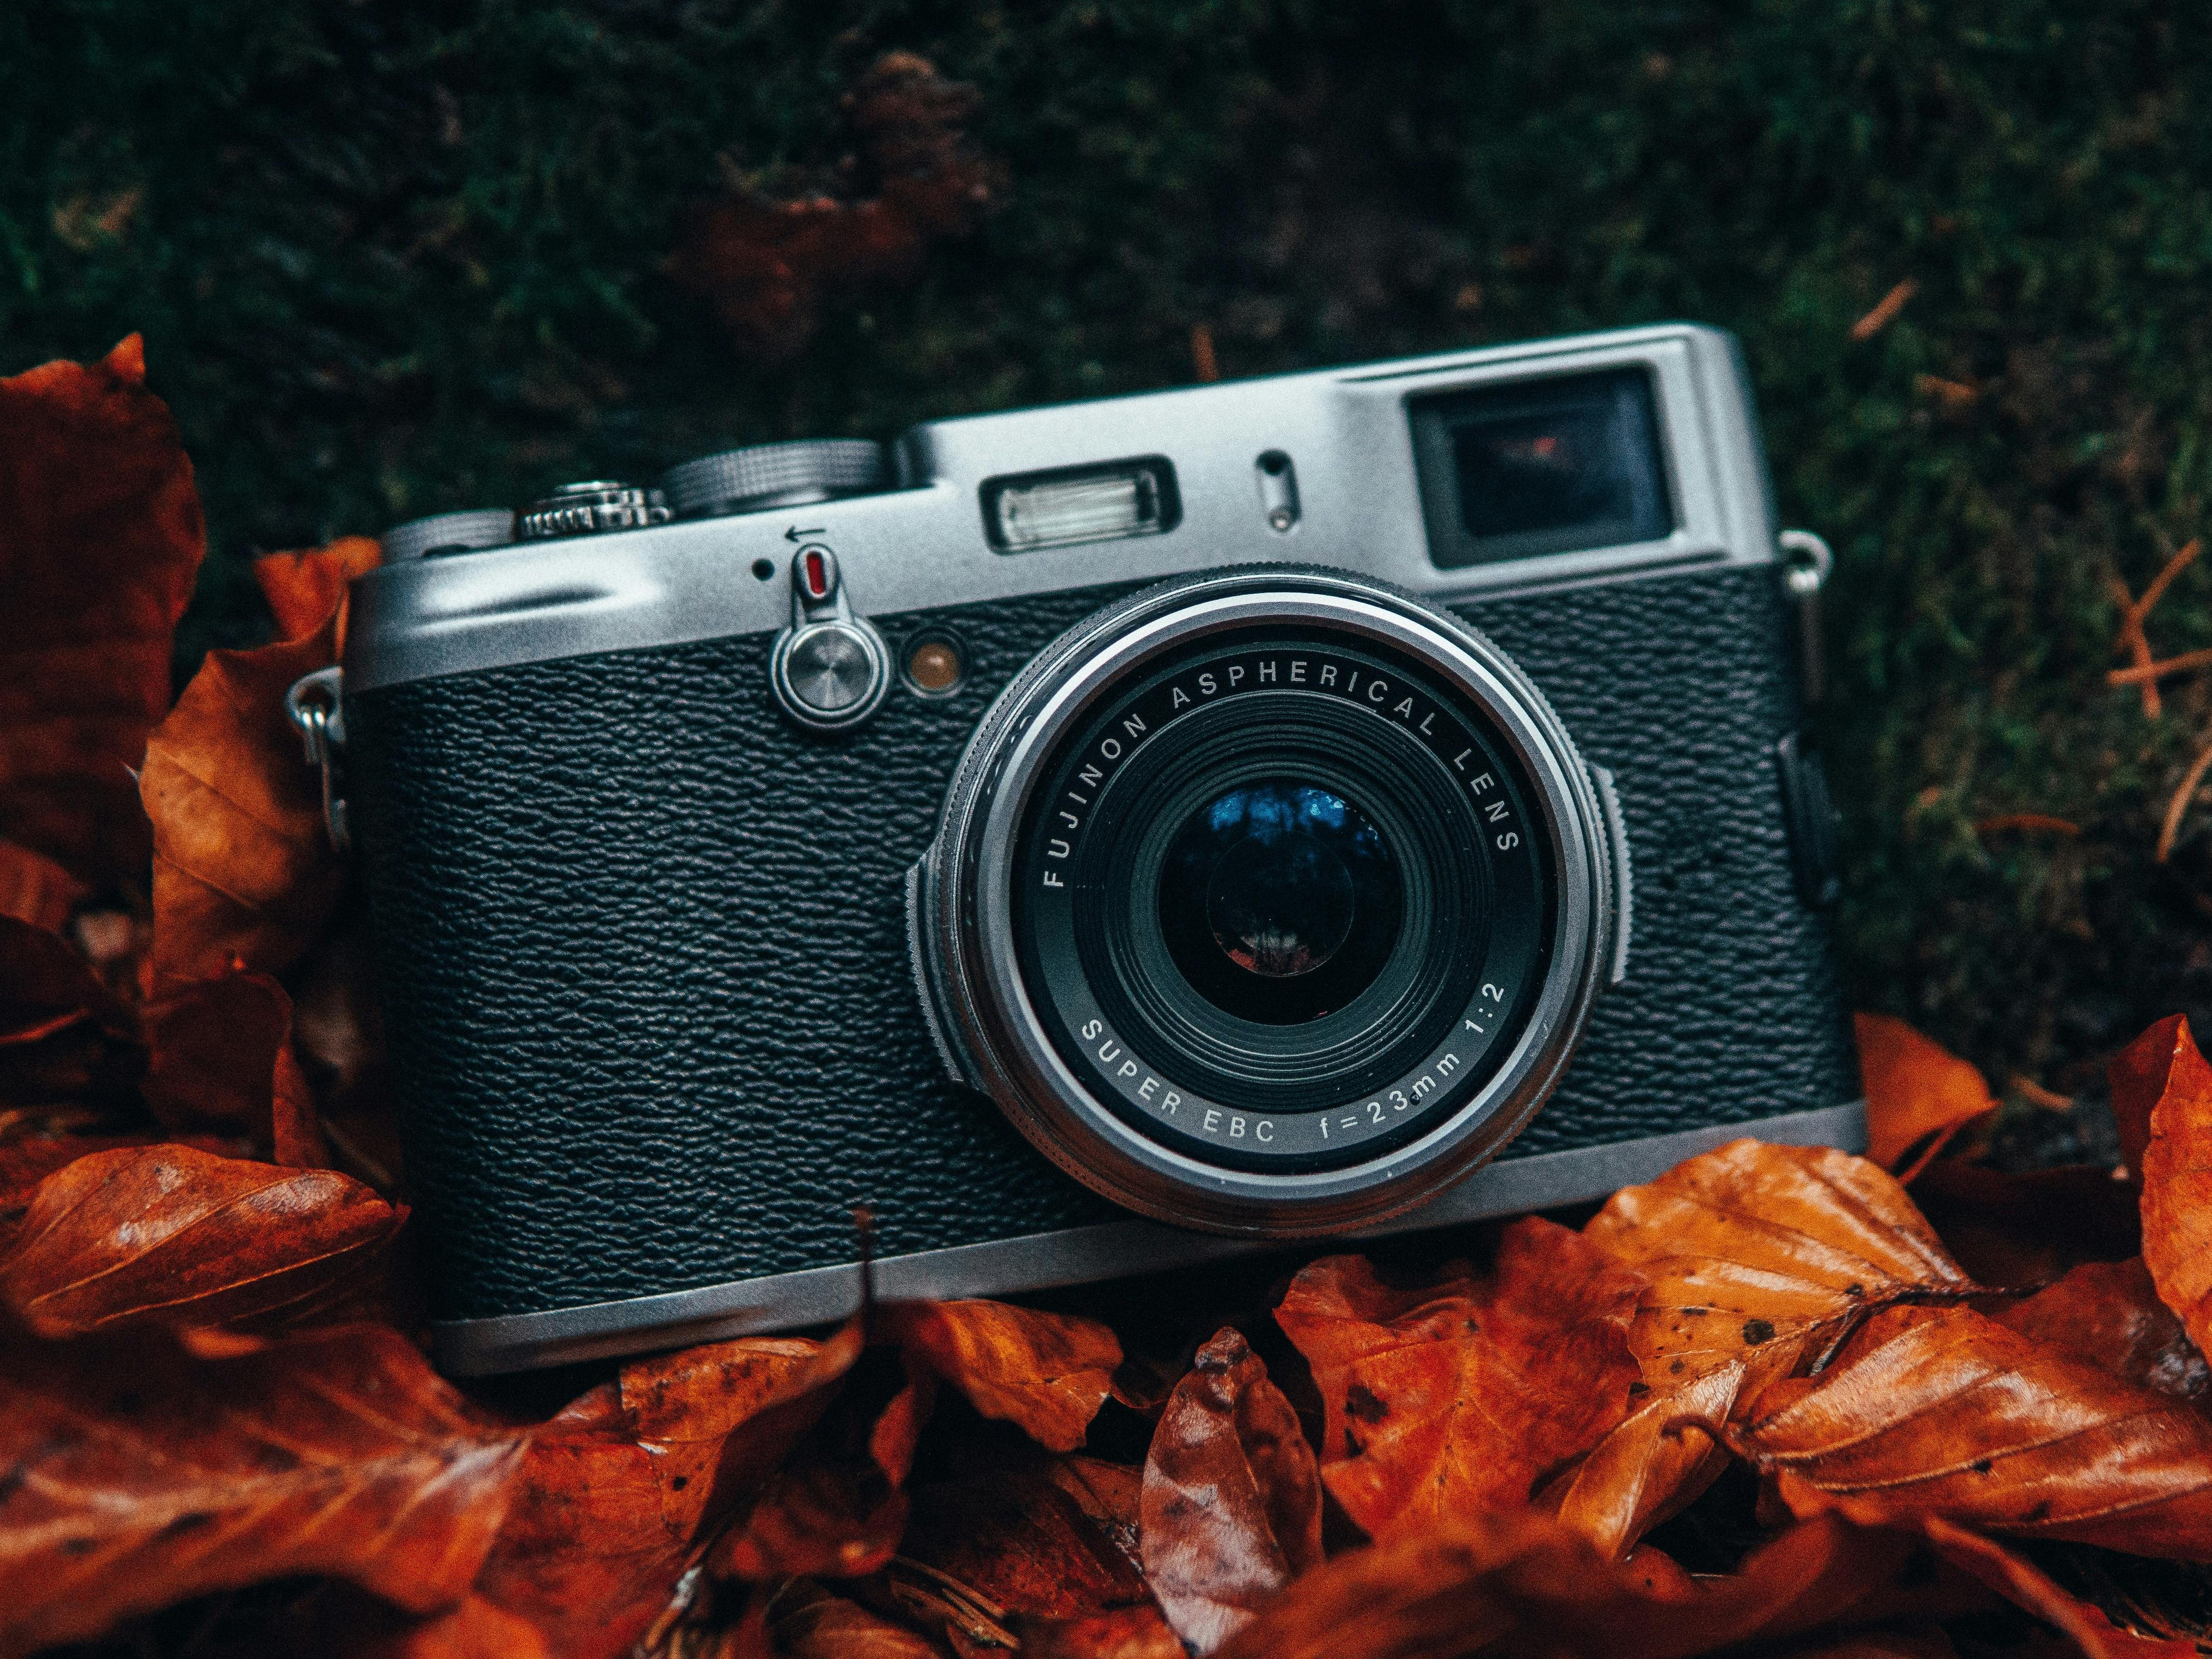 Photographic camera sat on orange autumn leaves with grass in the background